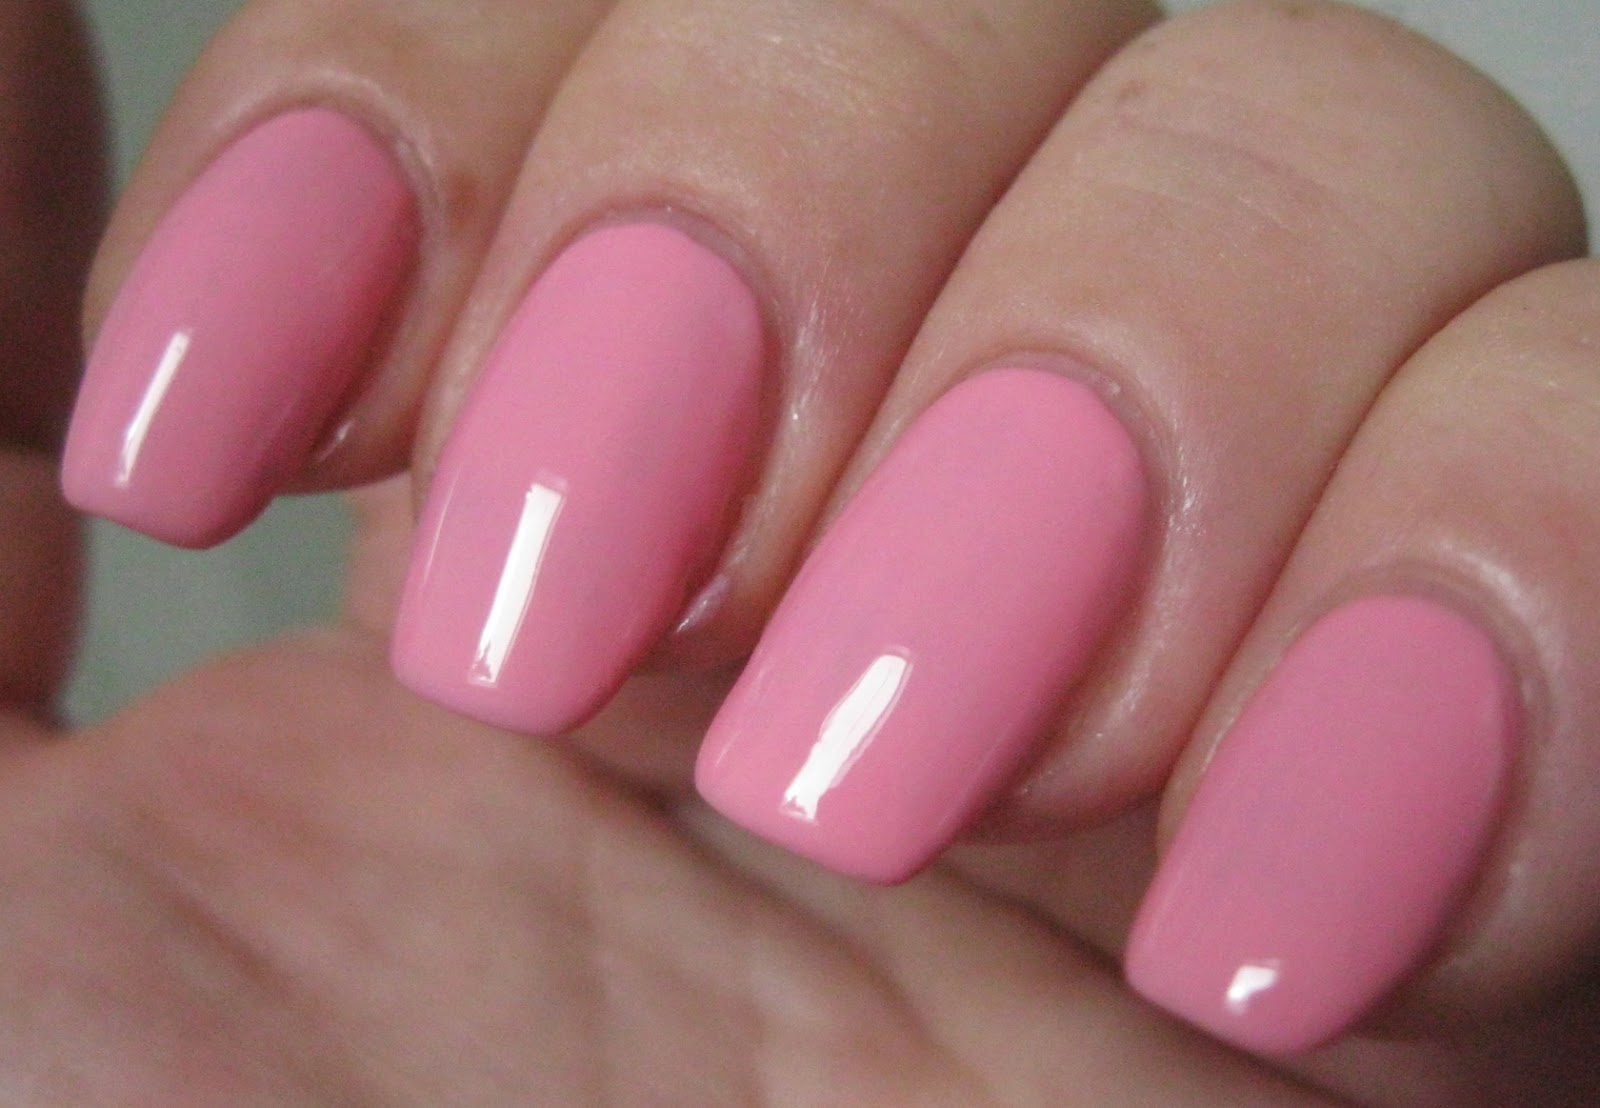 OPI Nail Polish in "Pink-ing of You" - wide 4